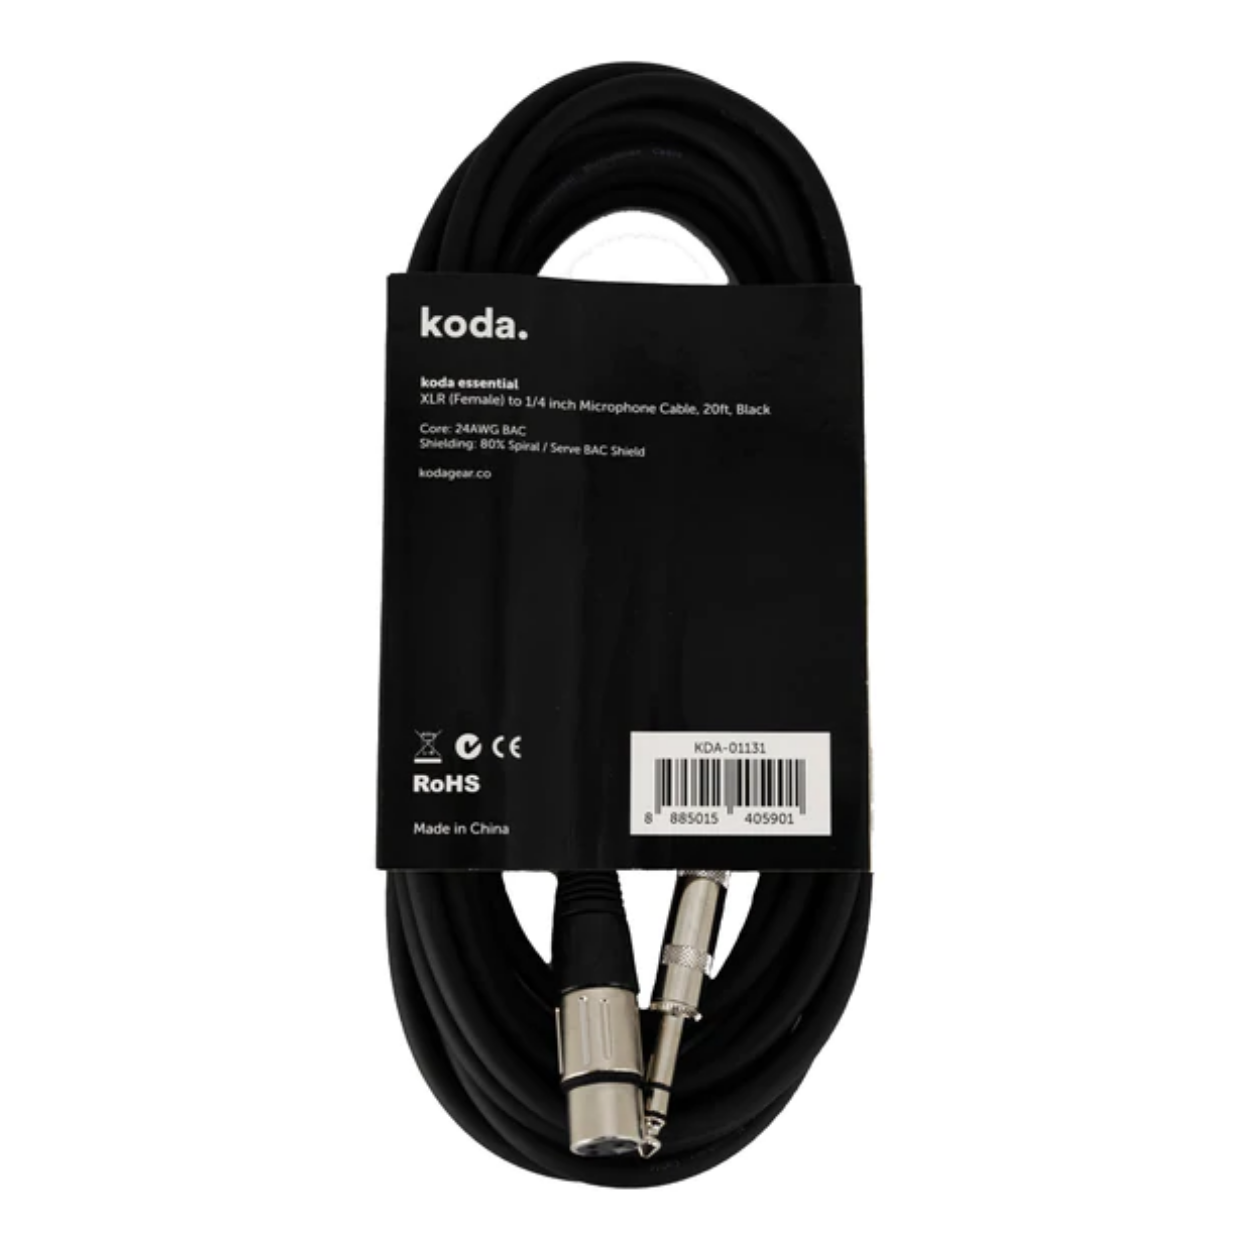 koda essential XLR (Female) to 1/4inch Microphone Cable, 20ft, Black